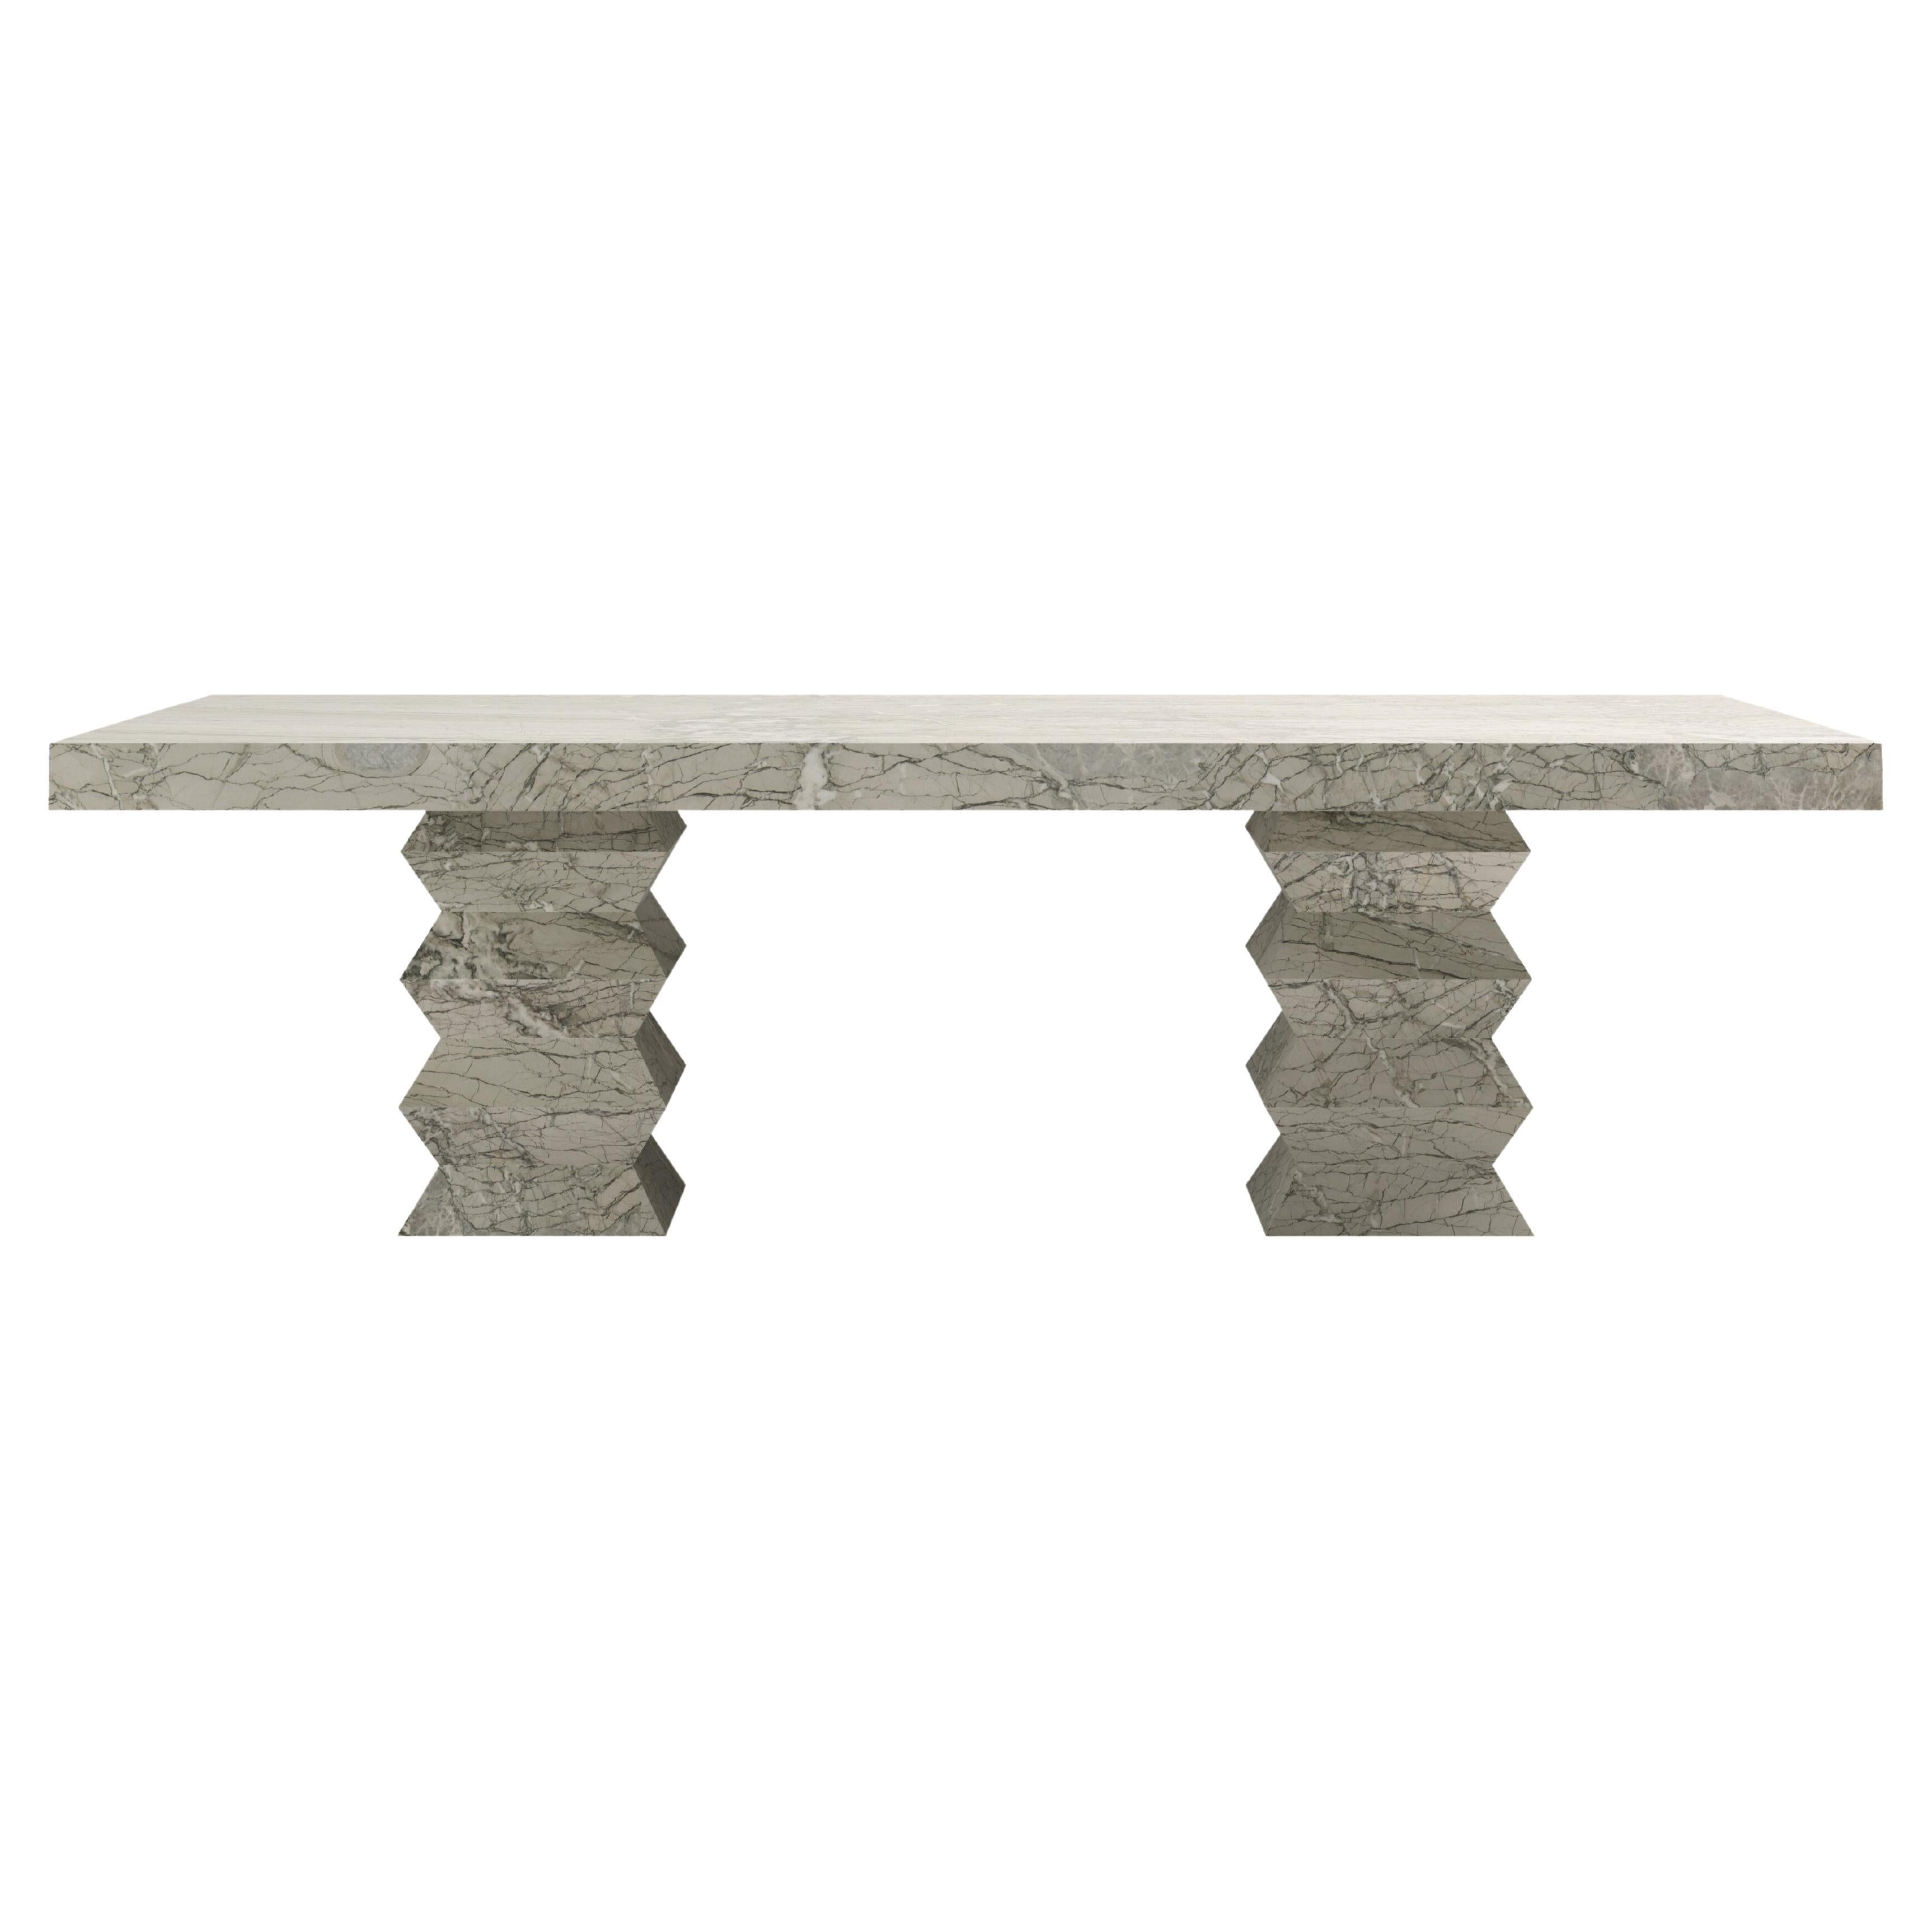 FORM(LA) Grinza Rectangle Dining Table 96"L x 42"W x 32"H Verde Antigua Marble